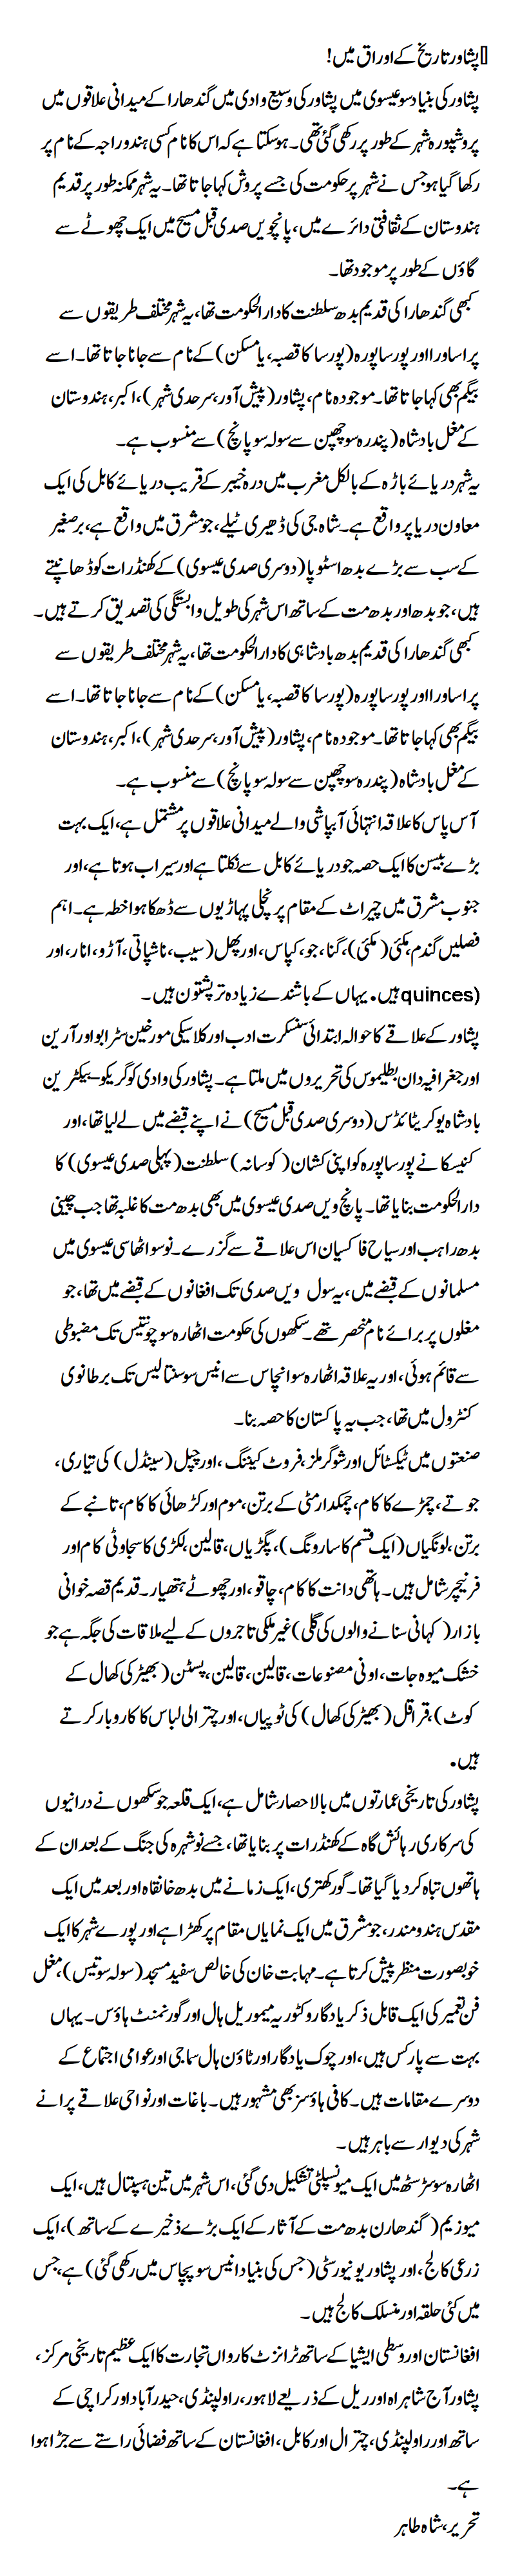 Peshawar in history papers